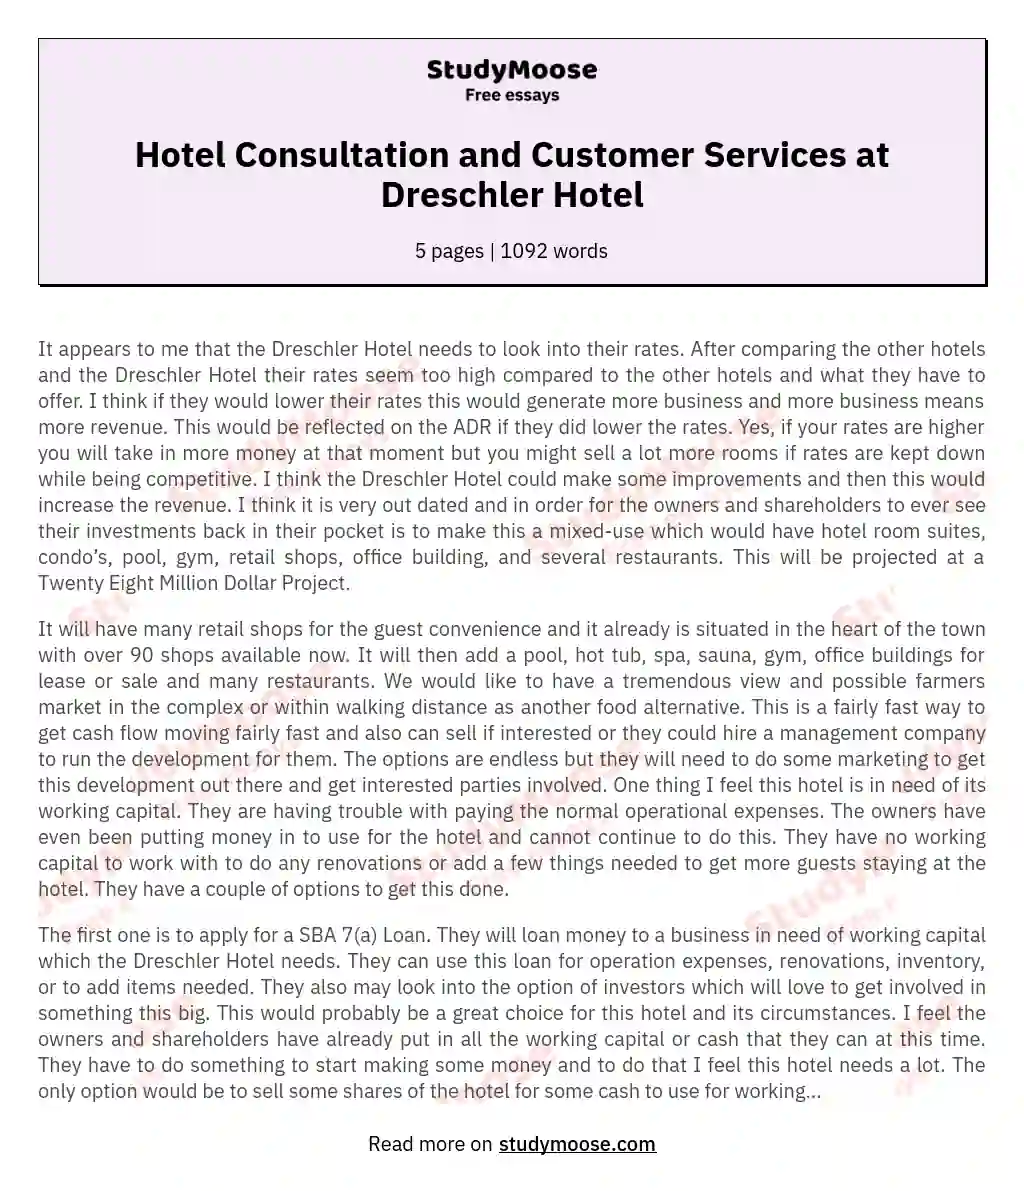 Hotel Consultation and Customer Services at Dreschler Hotel